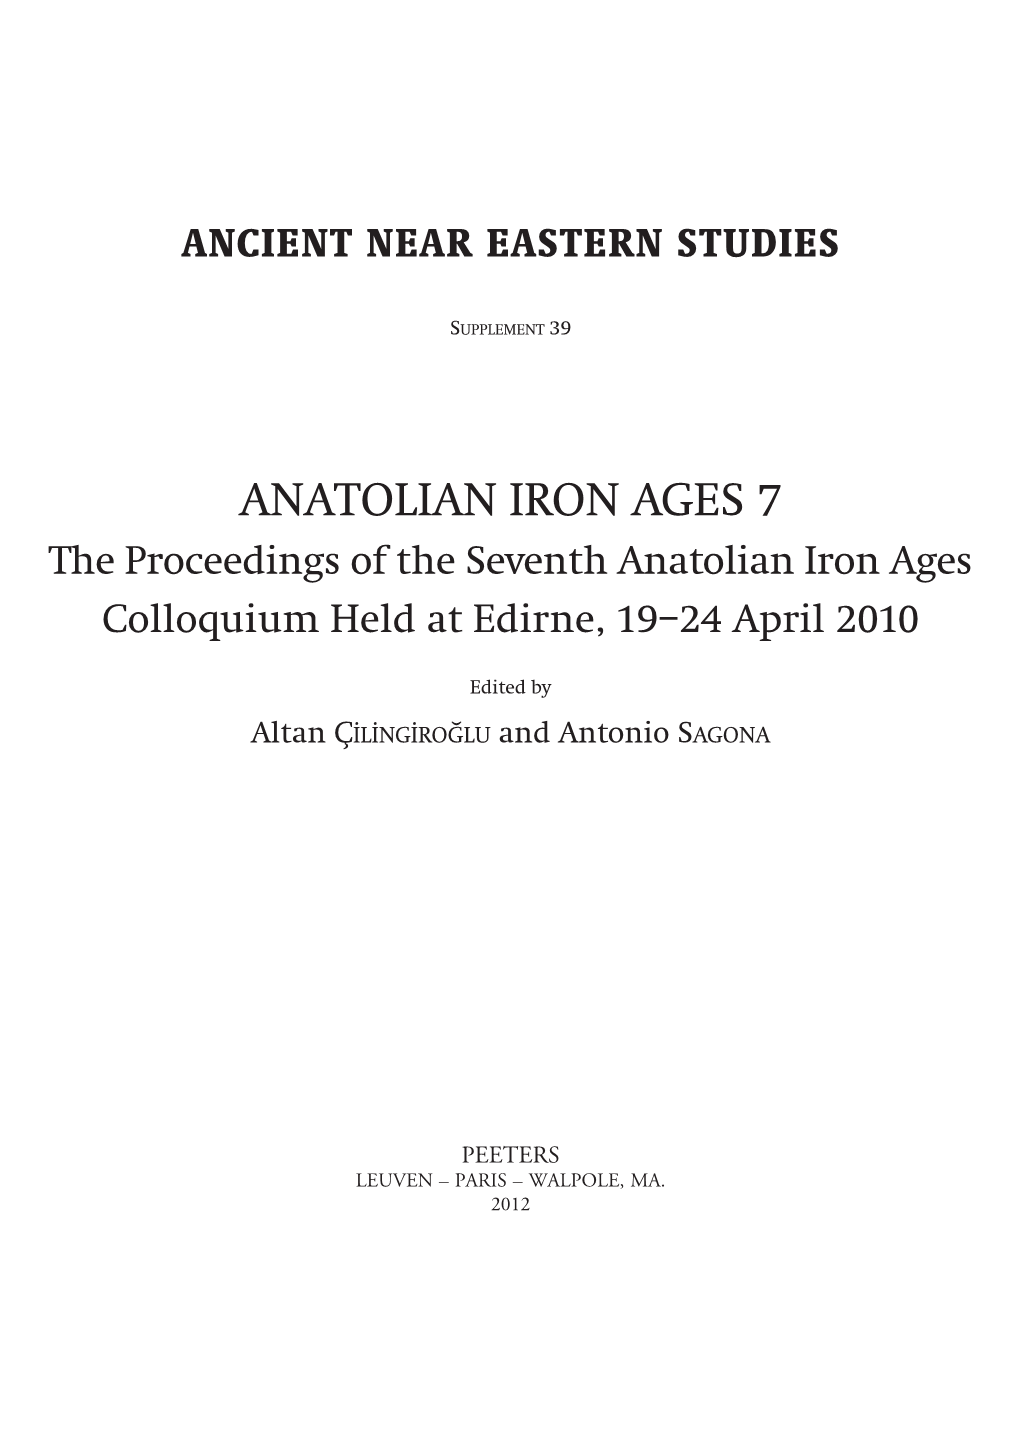 ANATOLIAN IRON AGES 7 the Proceedings of the Seventh Anatolian Iron Ages Colloquium Held at Edirne, 19–24 April 2010